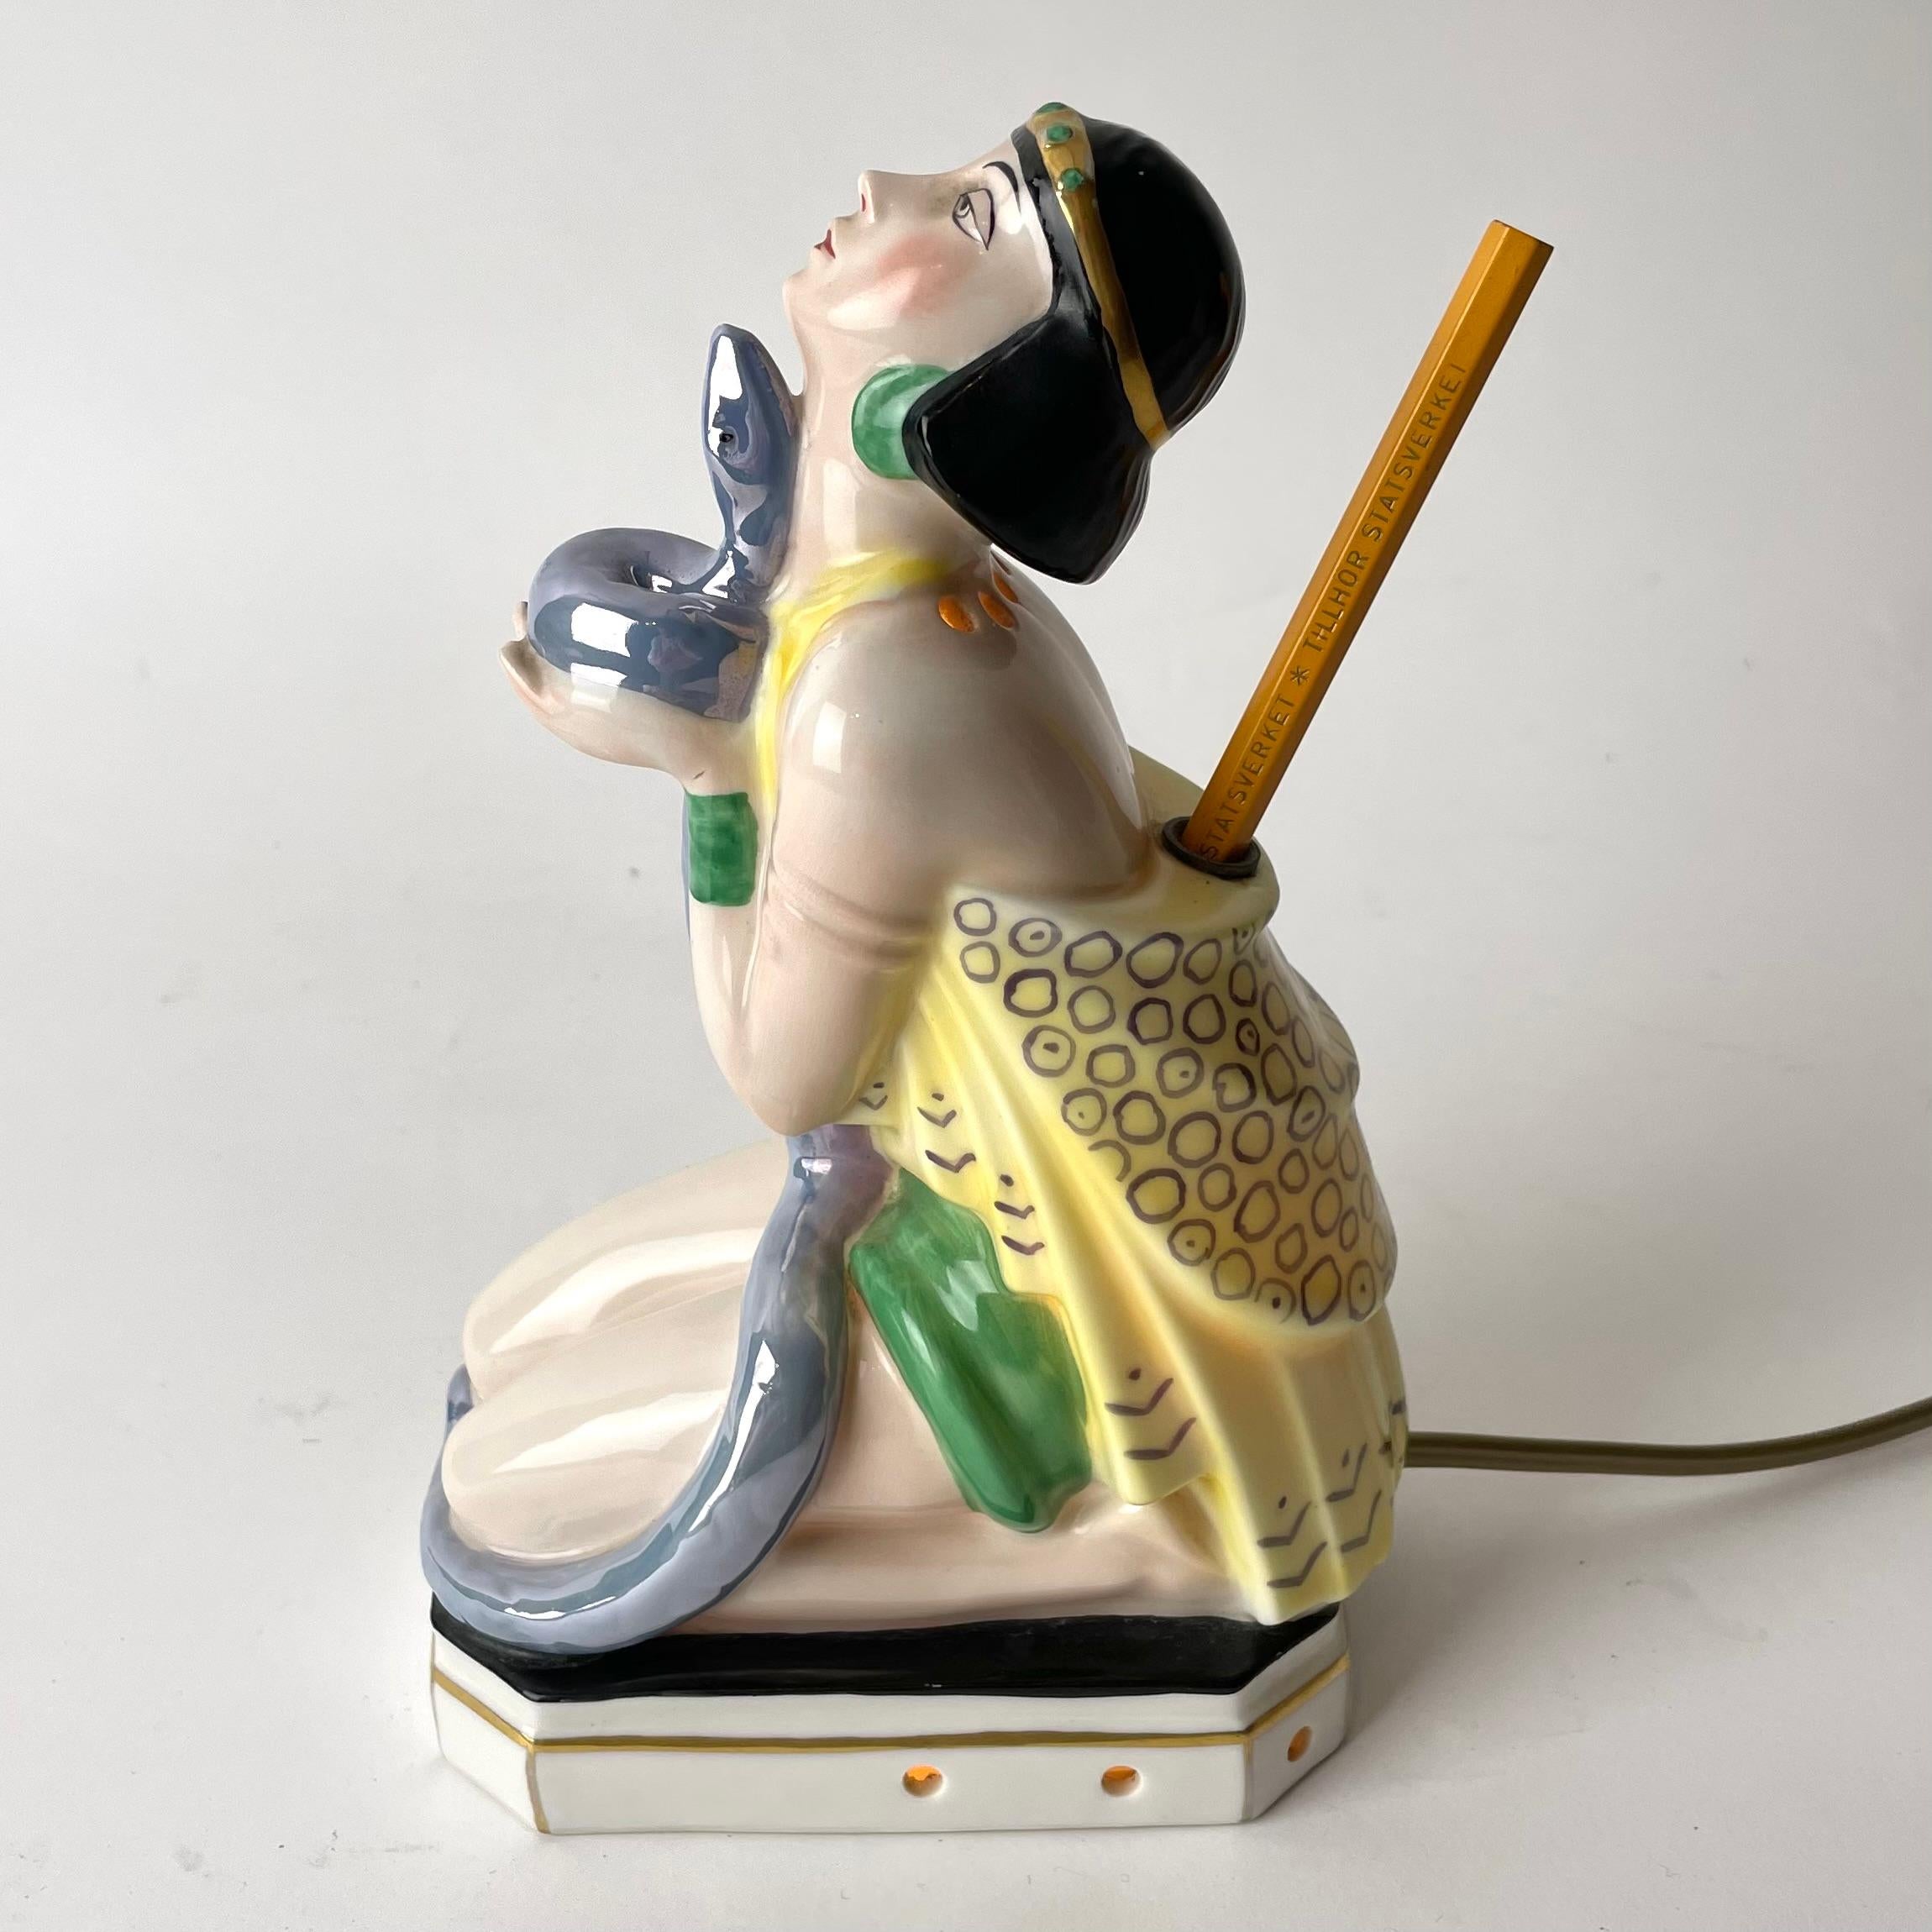 European Oriental Art Deco Sculptural Table Lamp with Pen Stand, Lady with Serpent, 1920s